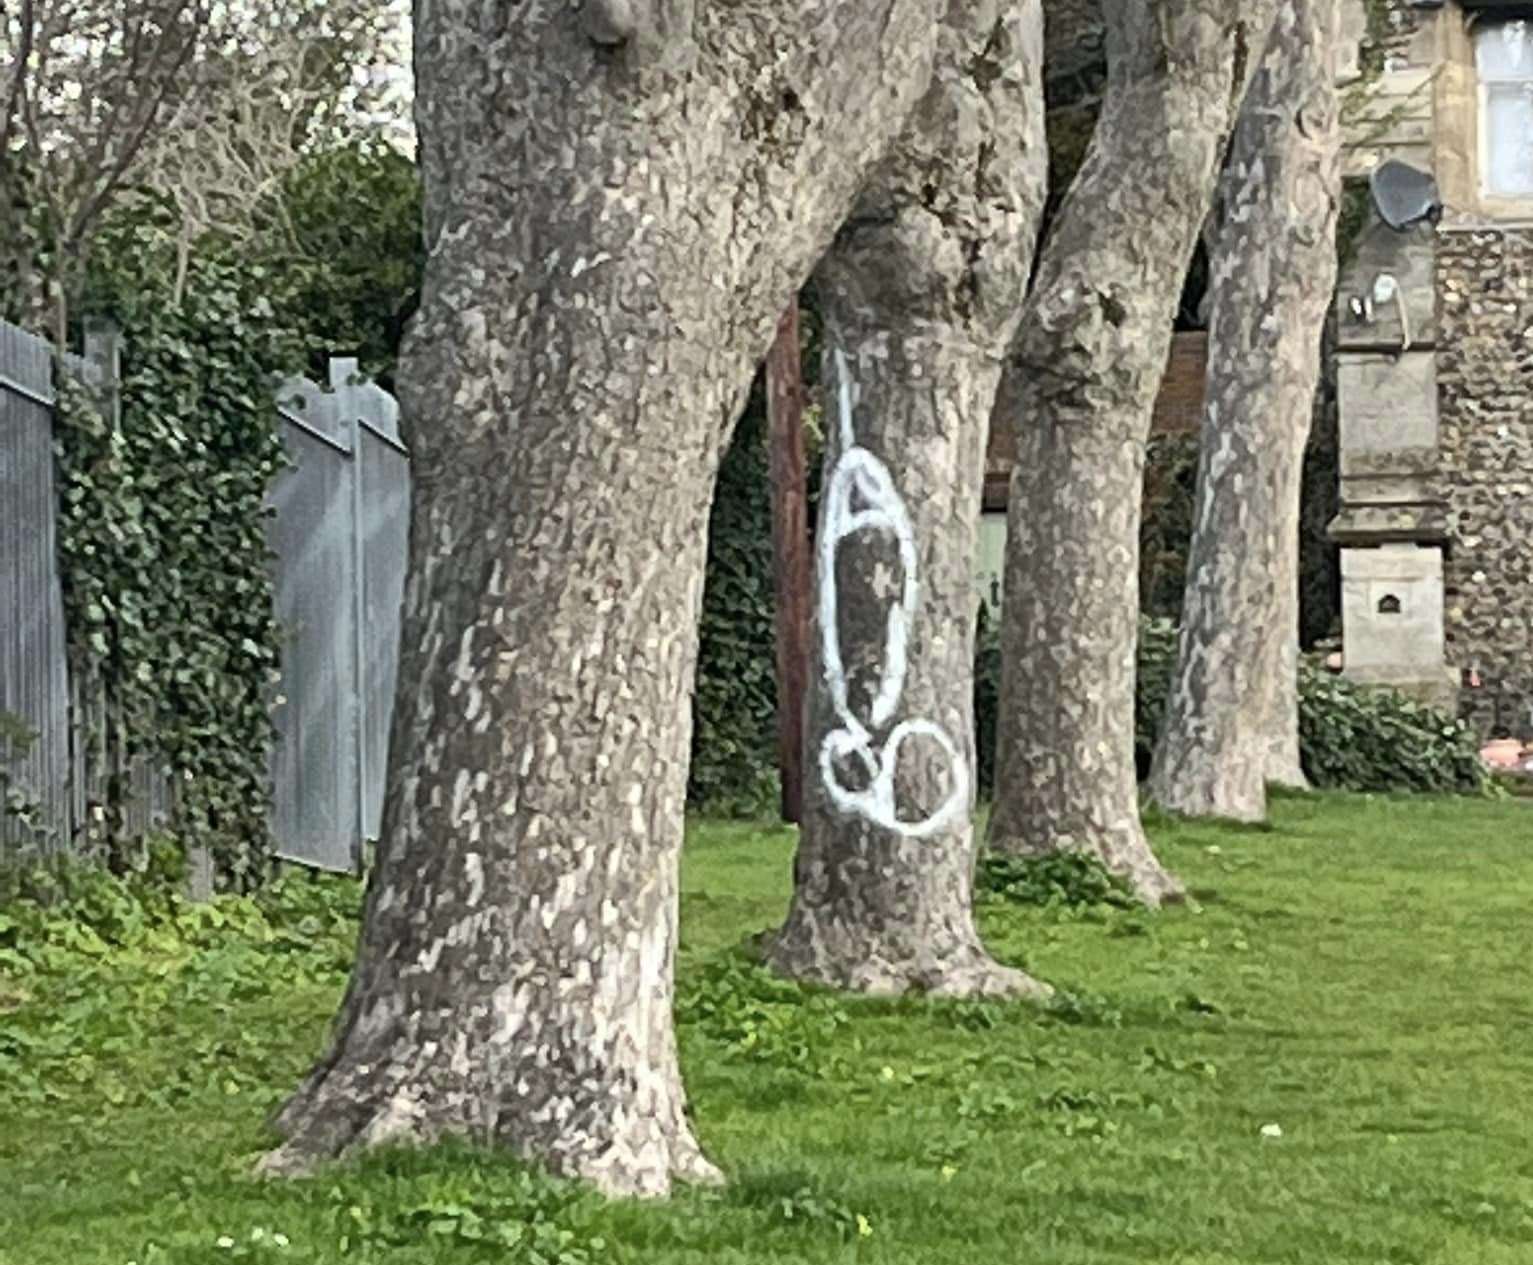 One phallic image was drawn on a tree at Ramsgate Cemetery. Picture: Lorraine Luckett